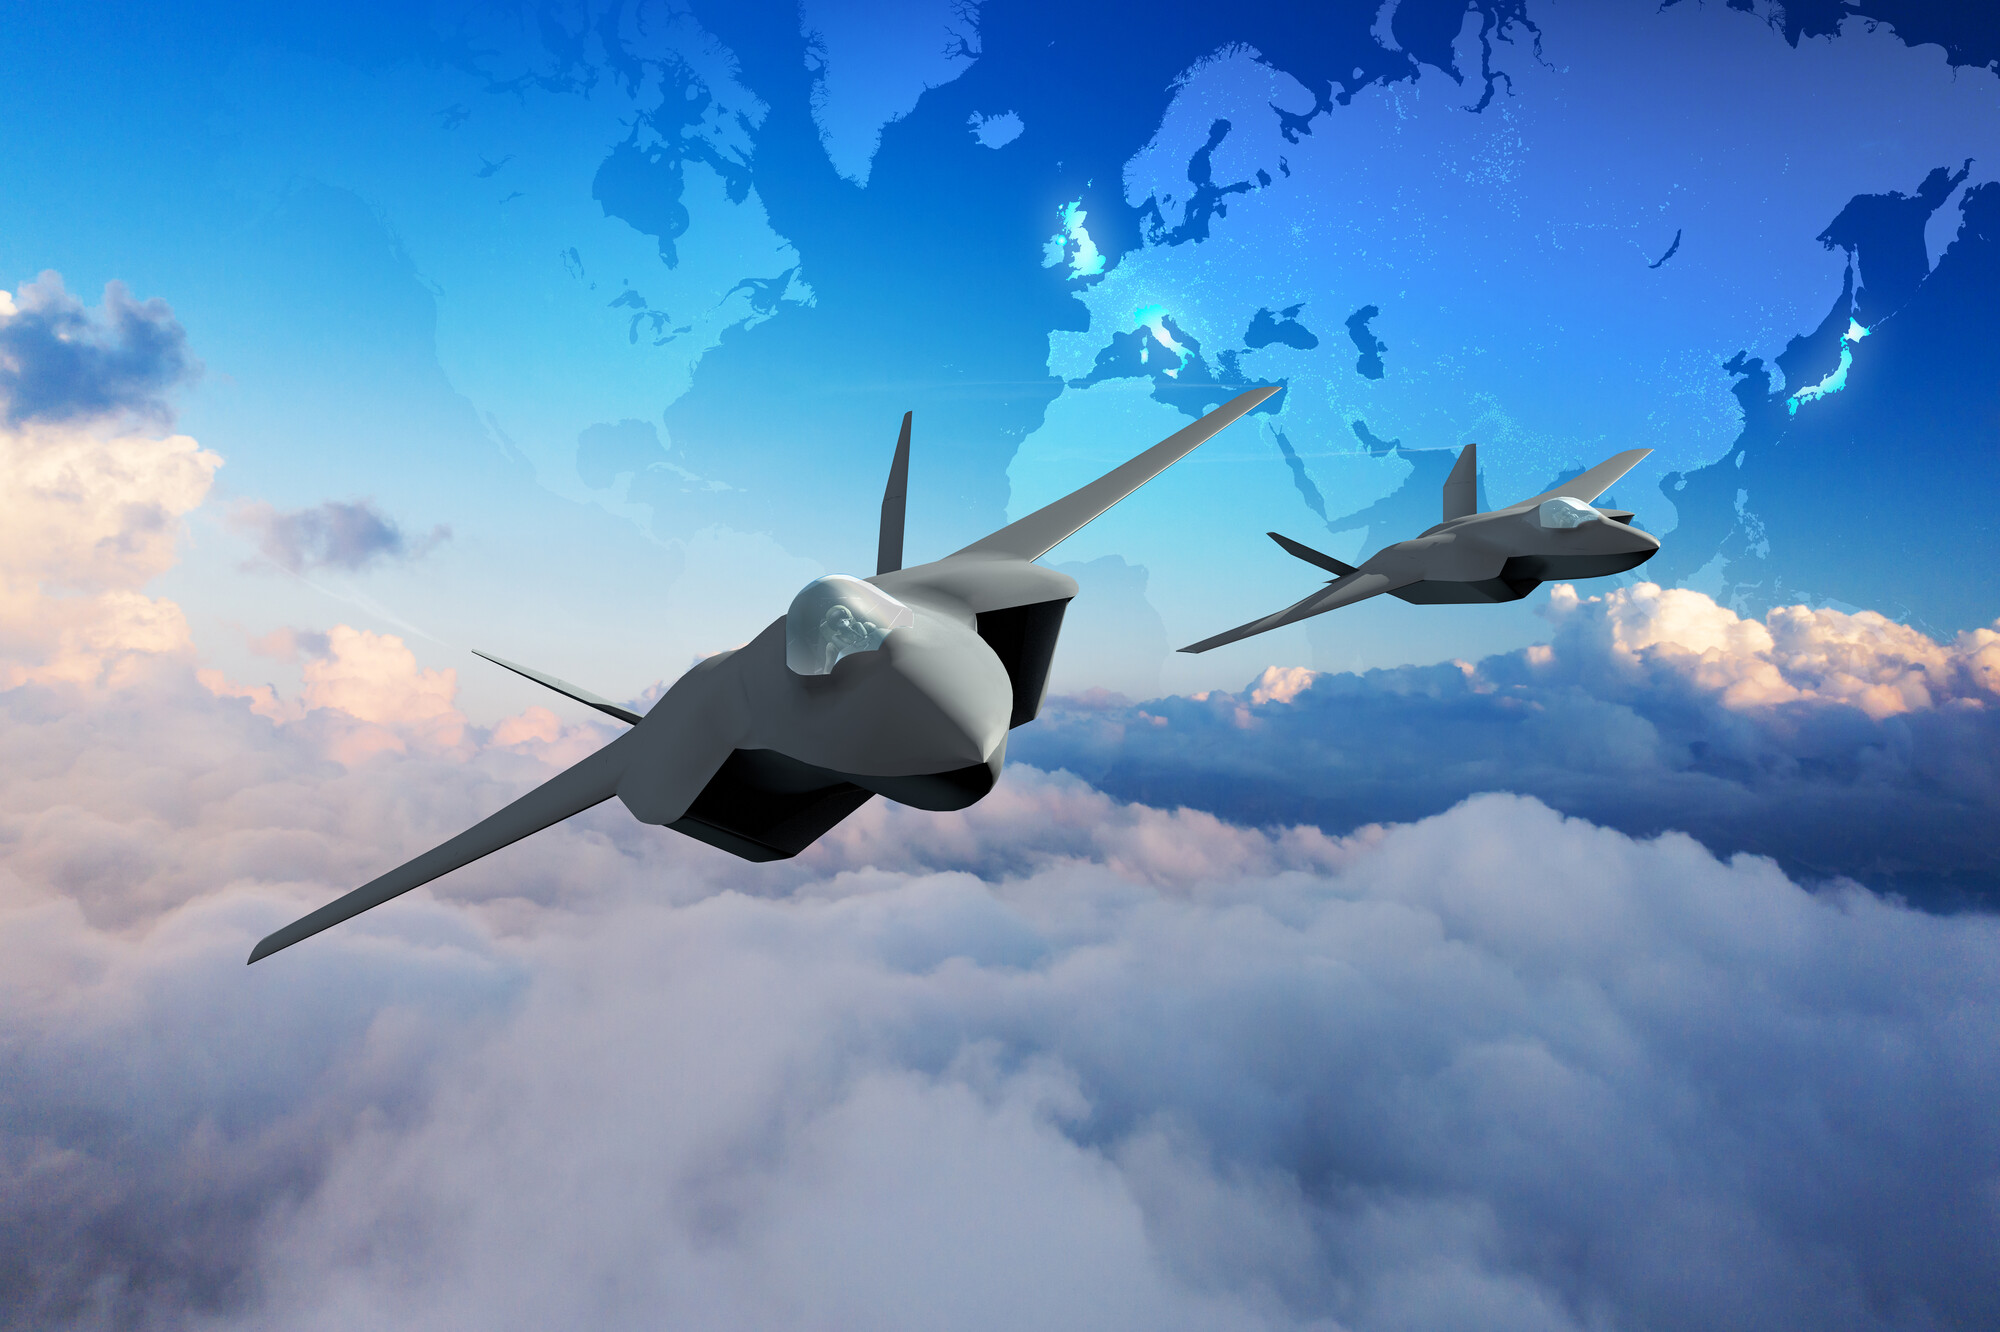 Digital graphic of next generation tempest aircraft in flight above the clouds.